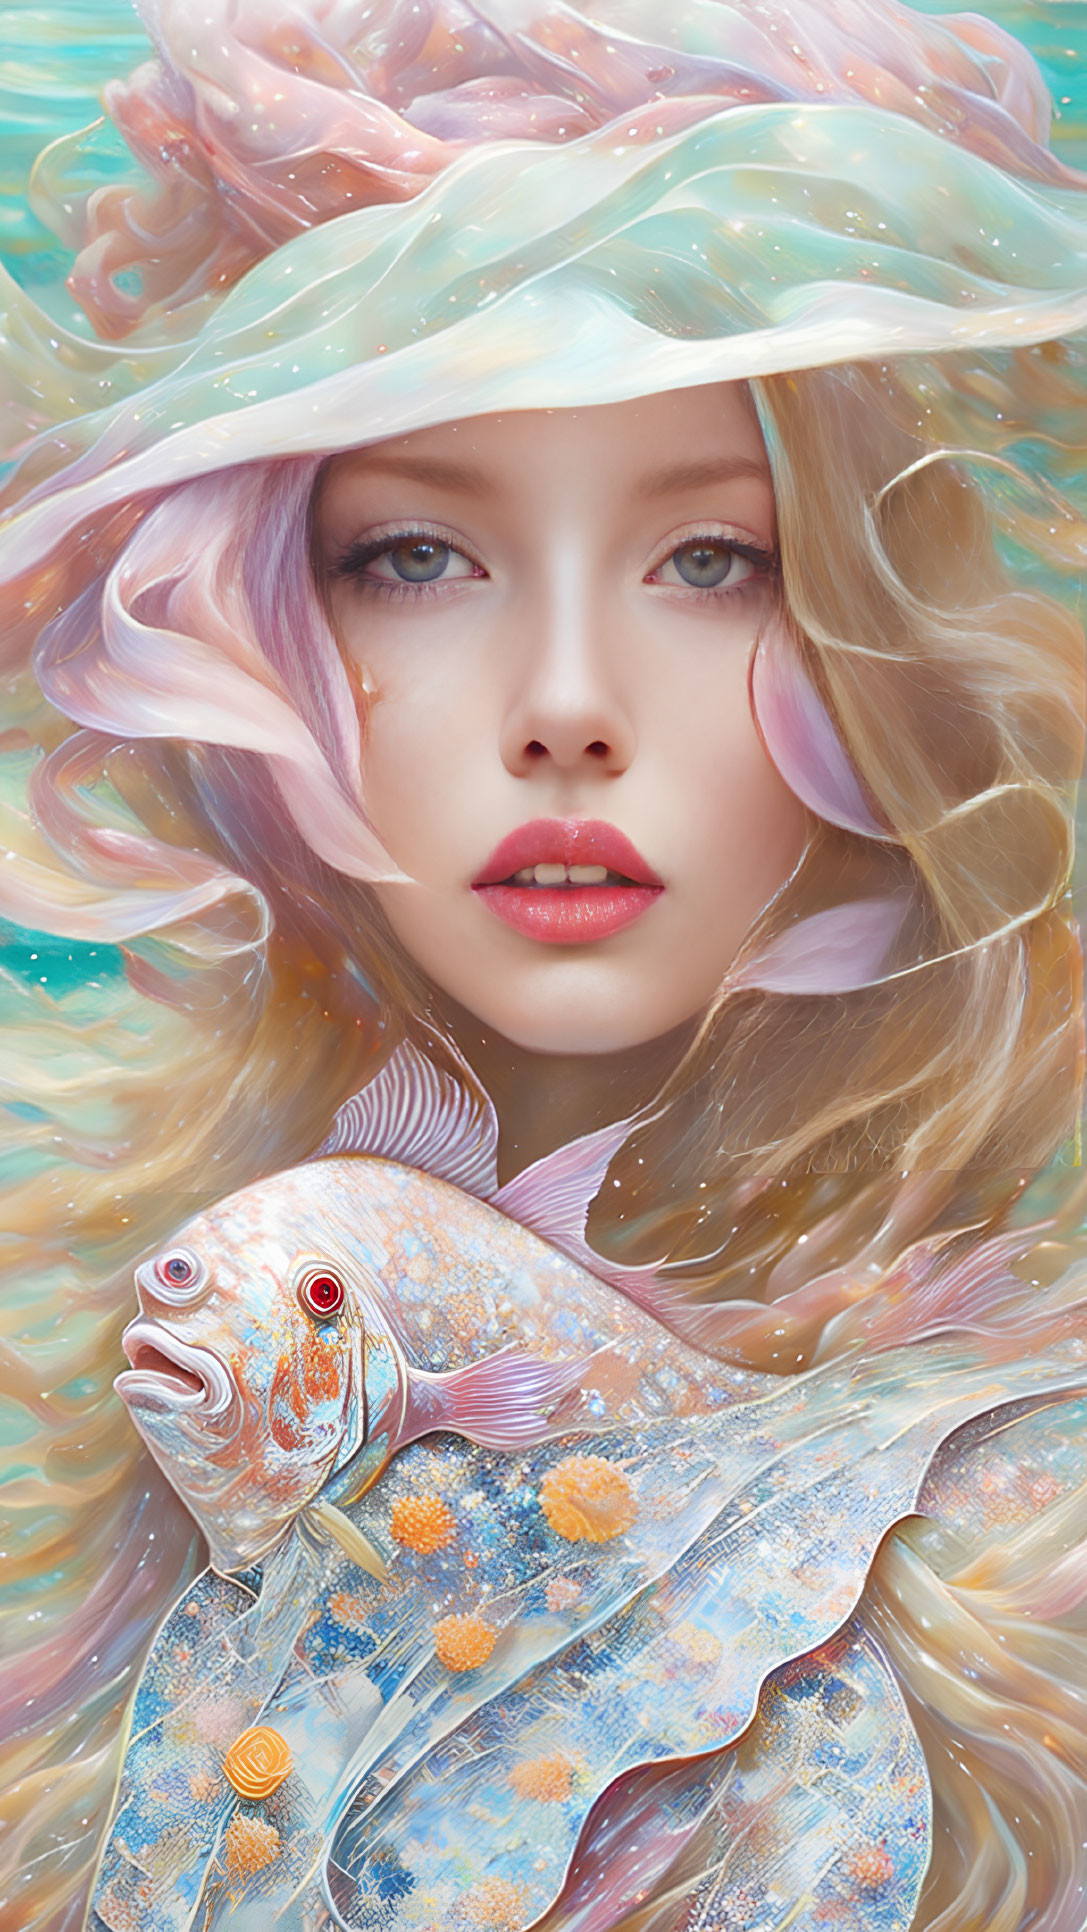 Surreal portrait of lady with flowing hair and jellyfish-like hat holding colorful fish against aquatic background